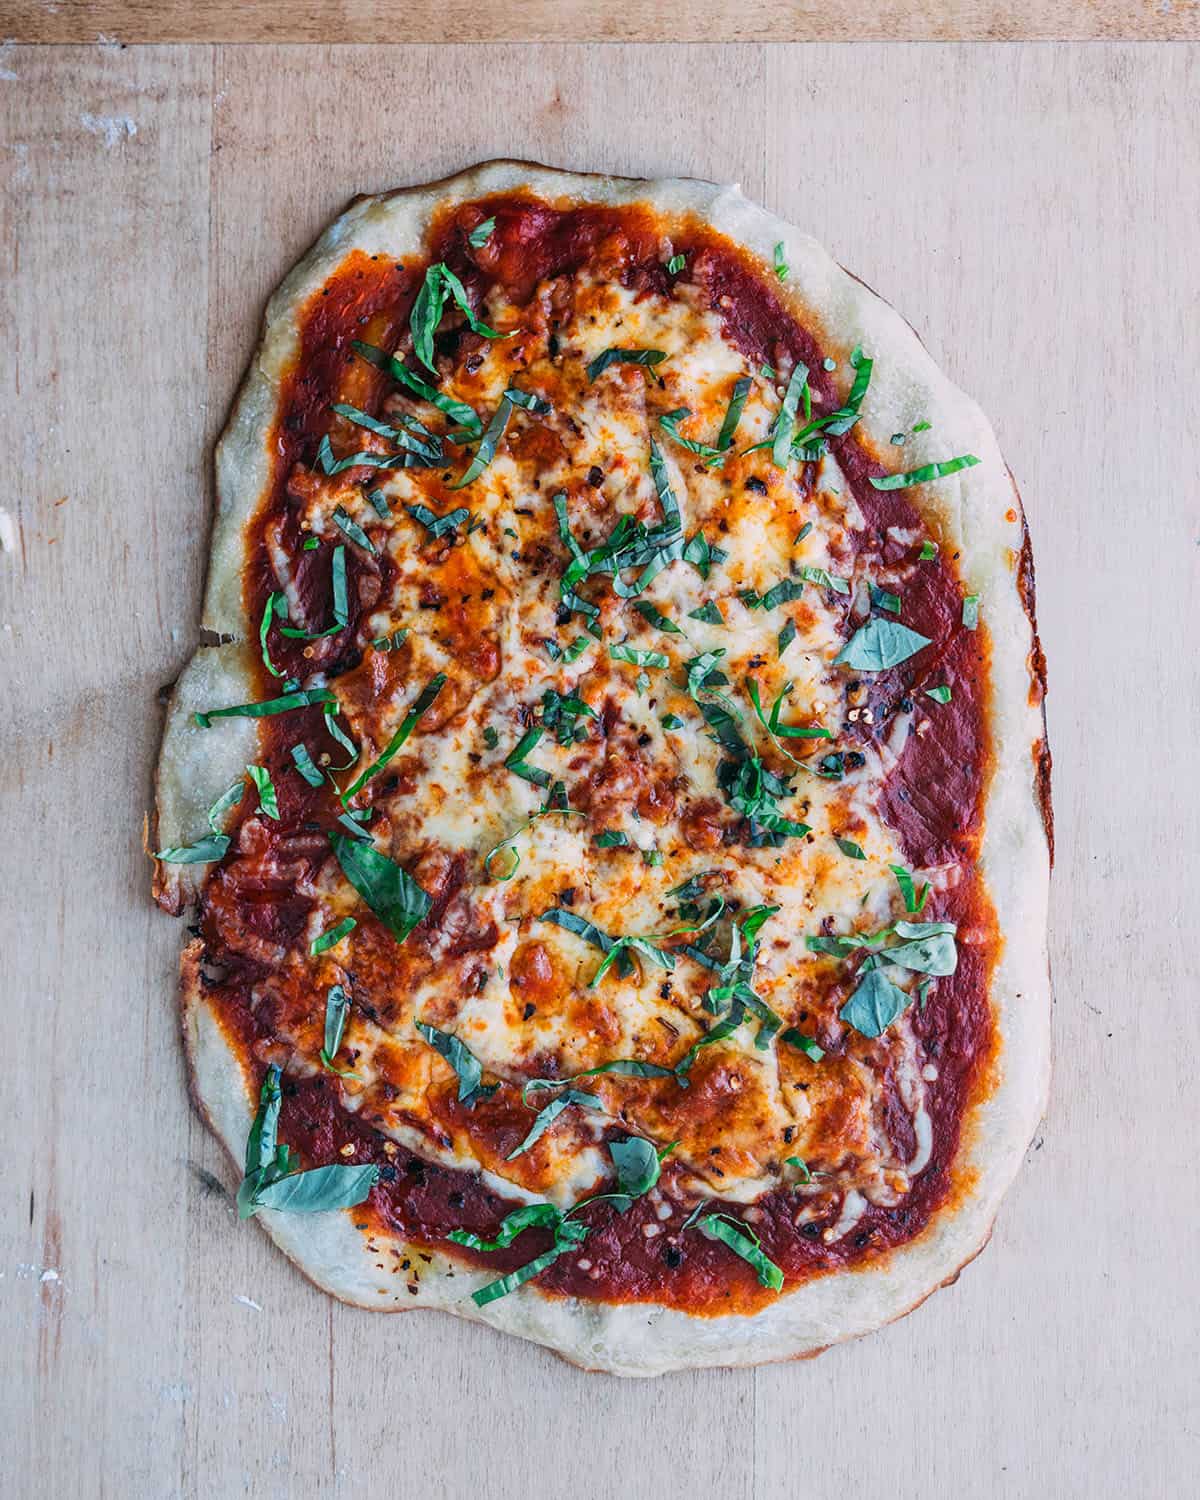 Baked sourdough pizza with red sauce, cheese, and basil. 